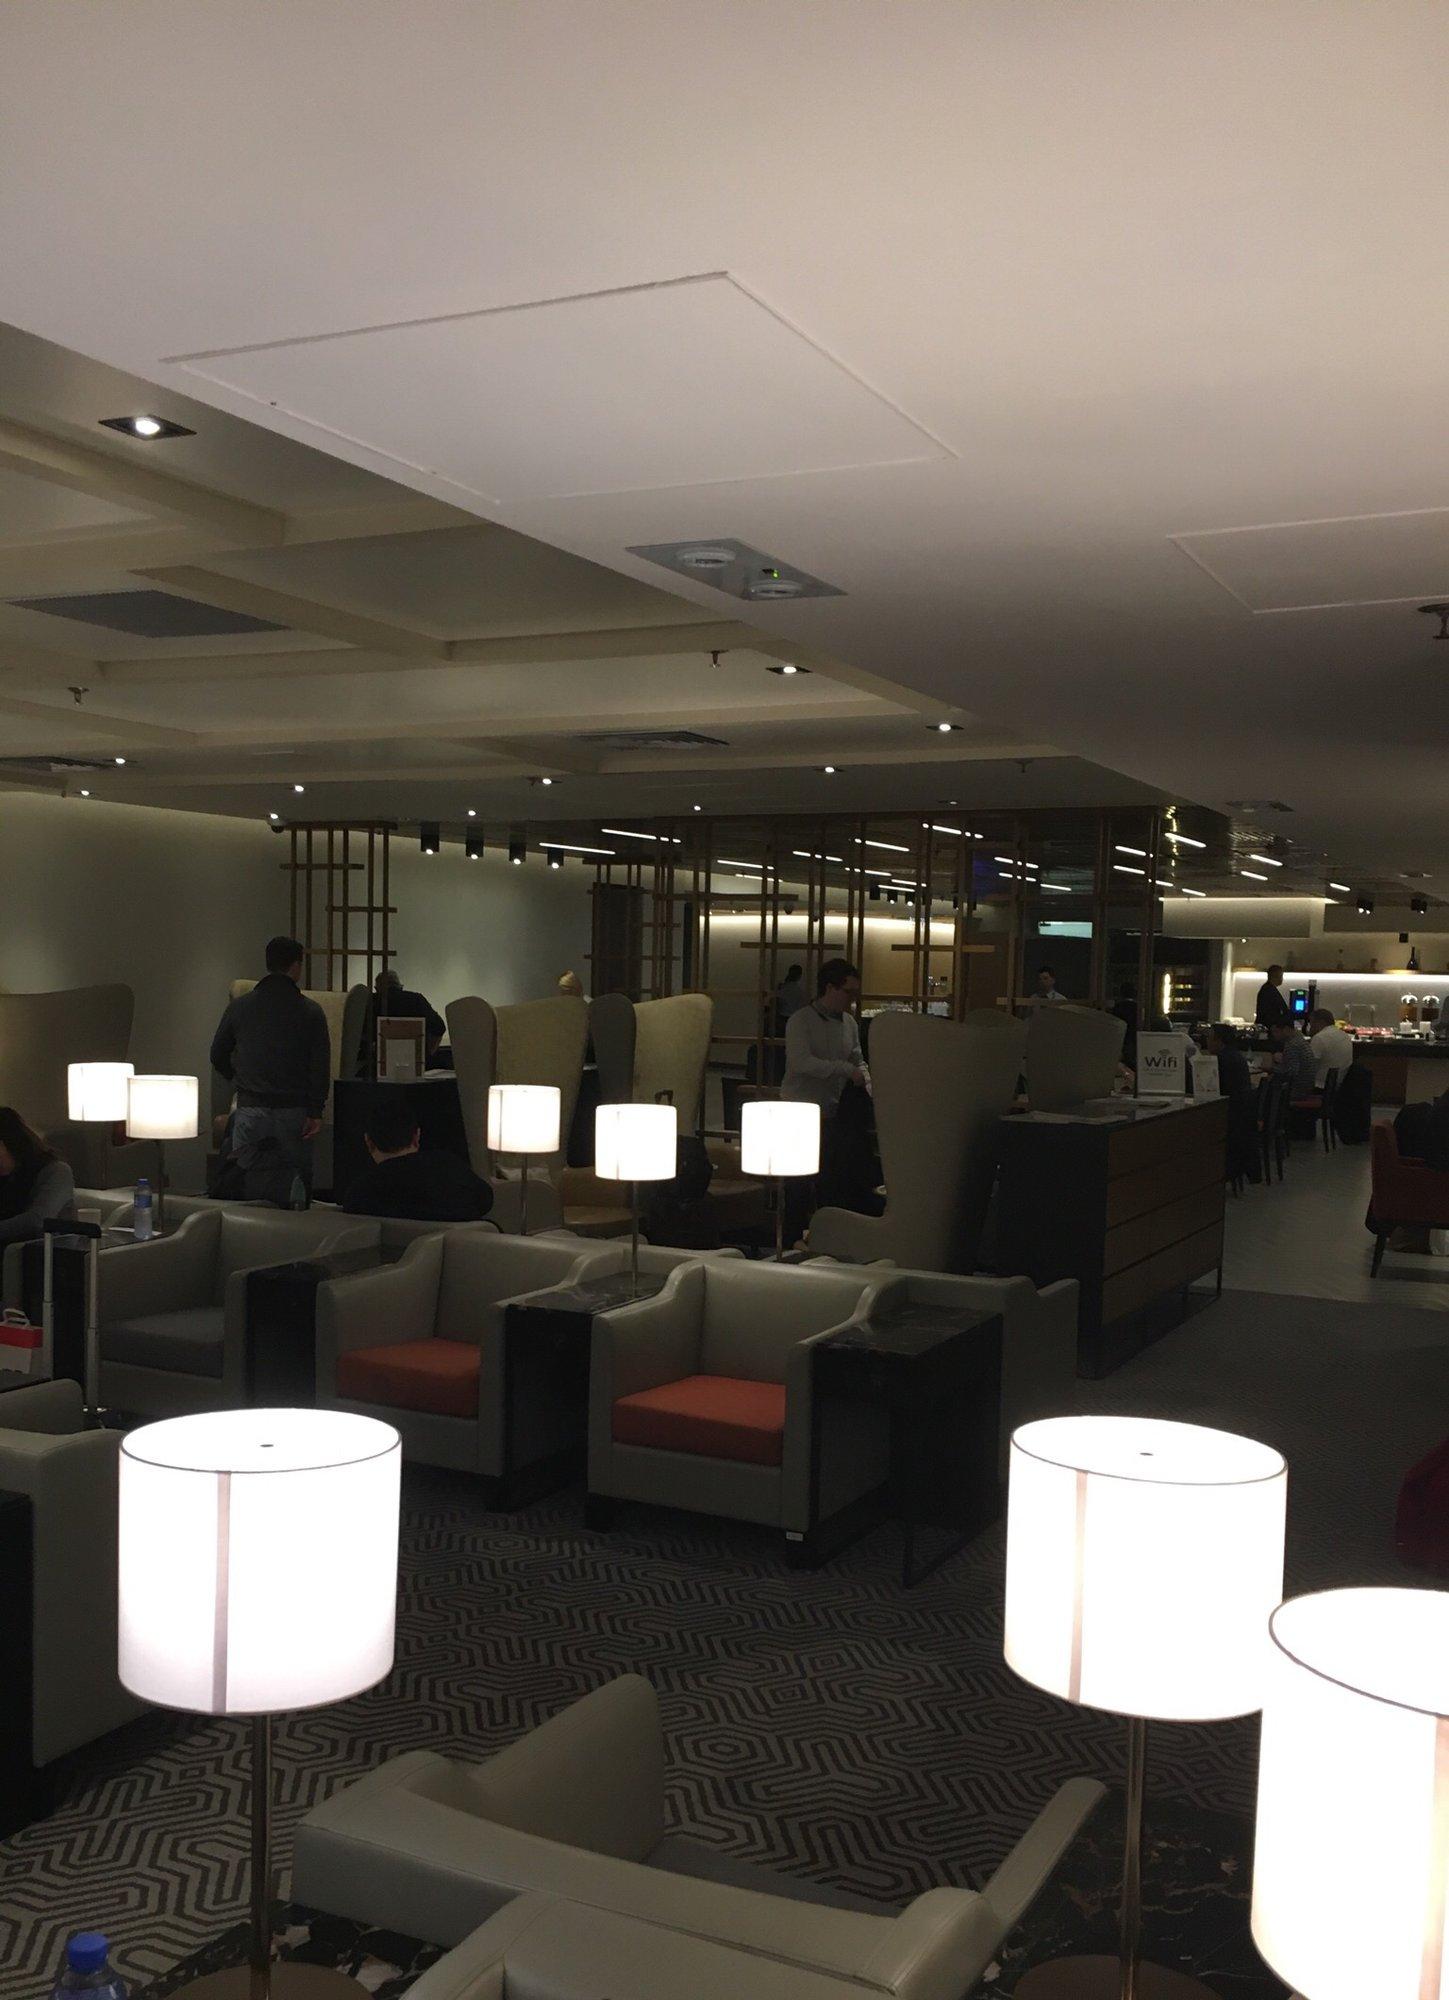 Singapore Airlines SilverKris Business Class Lounge image 22 of 68